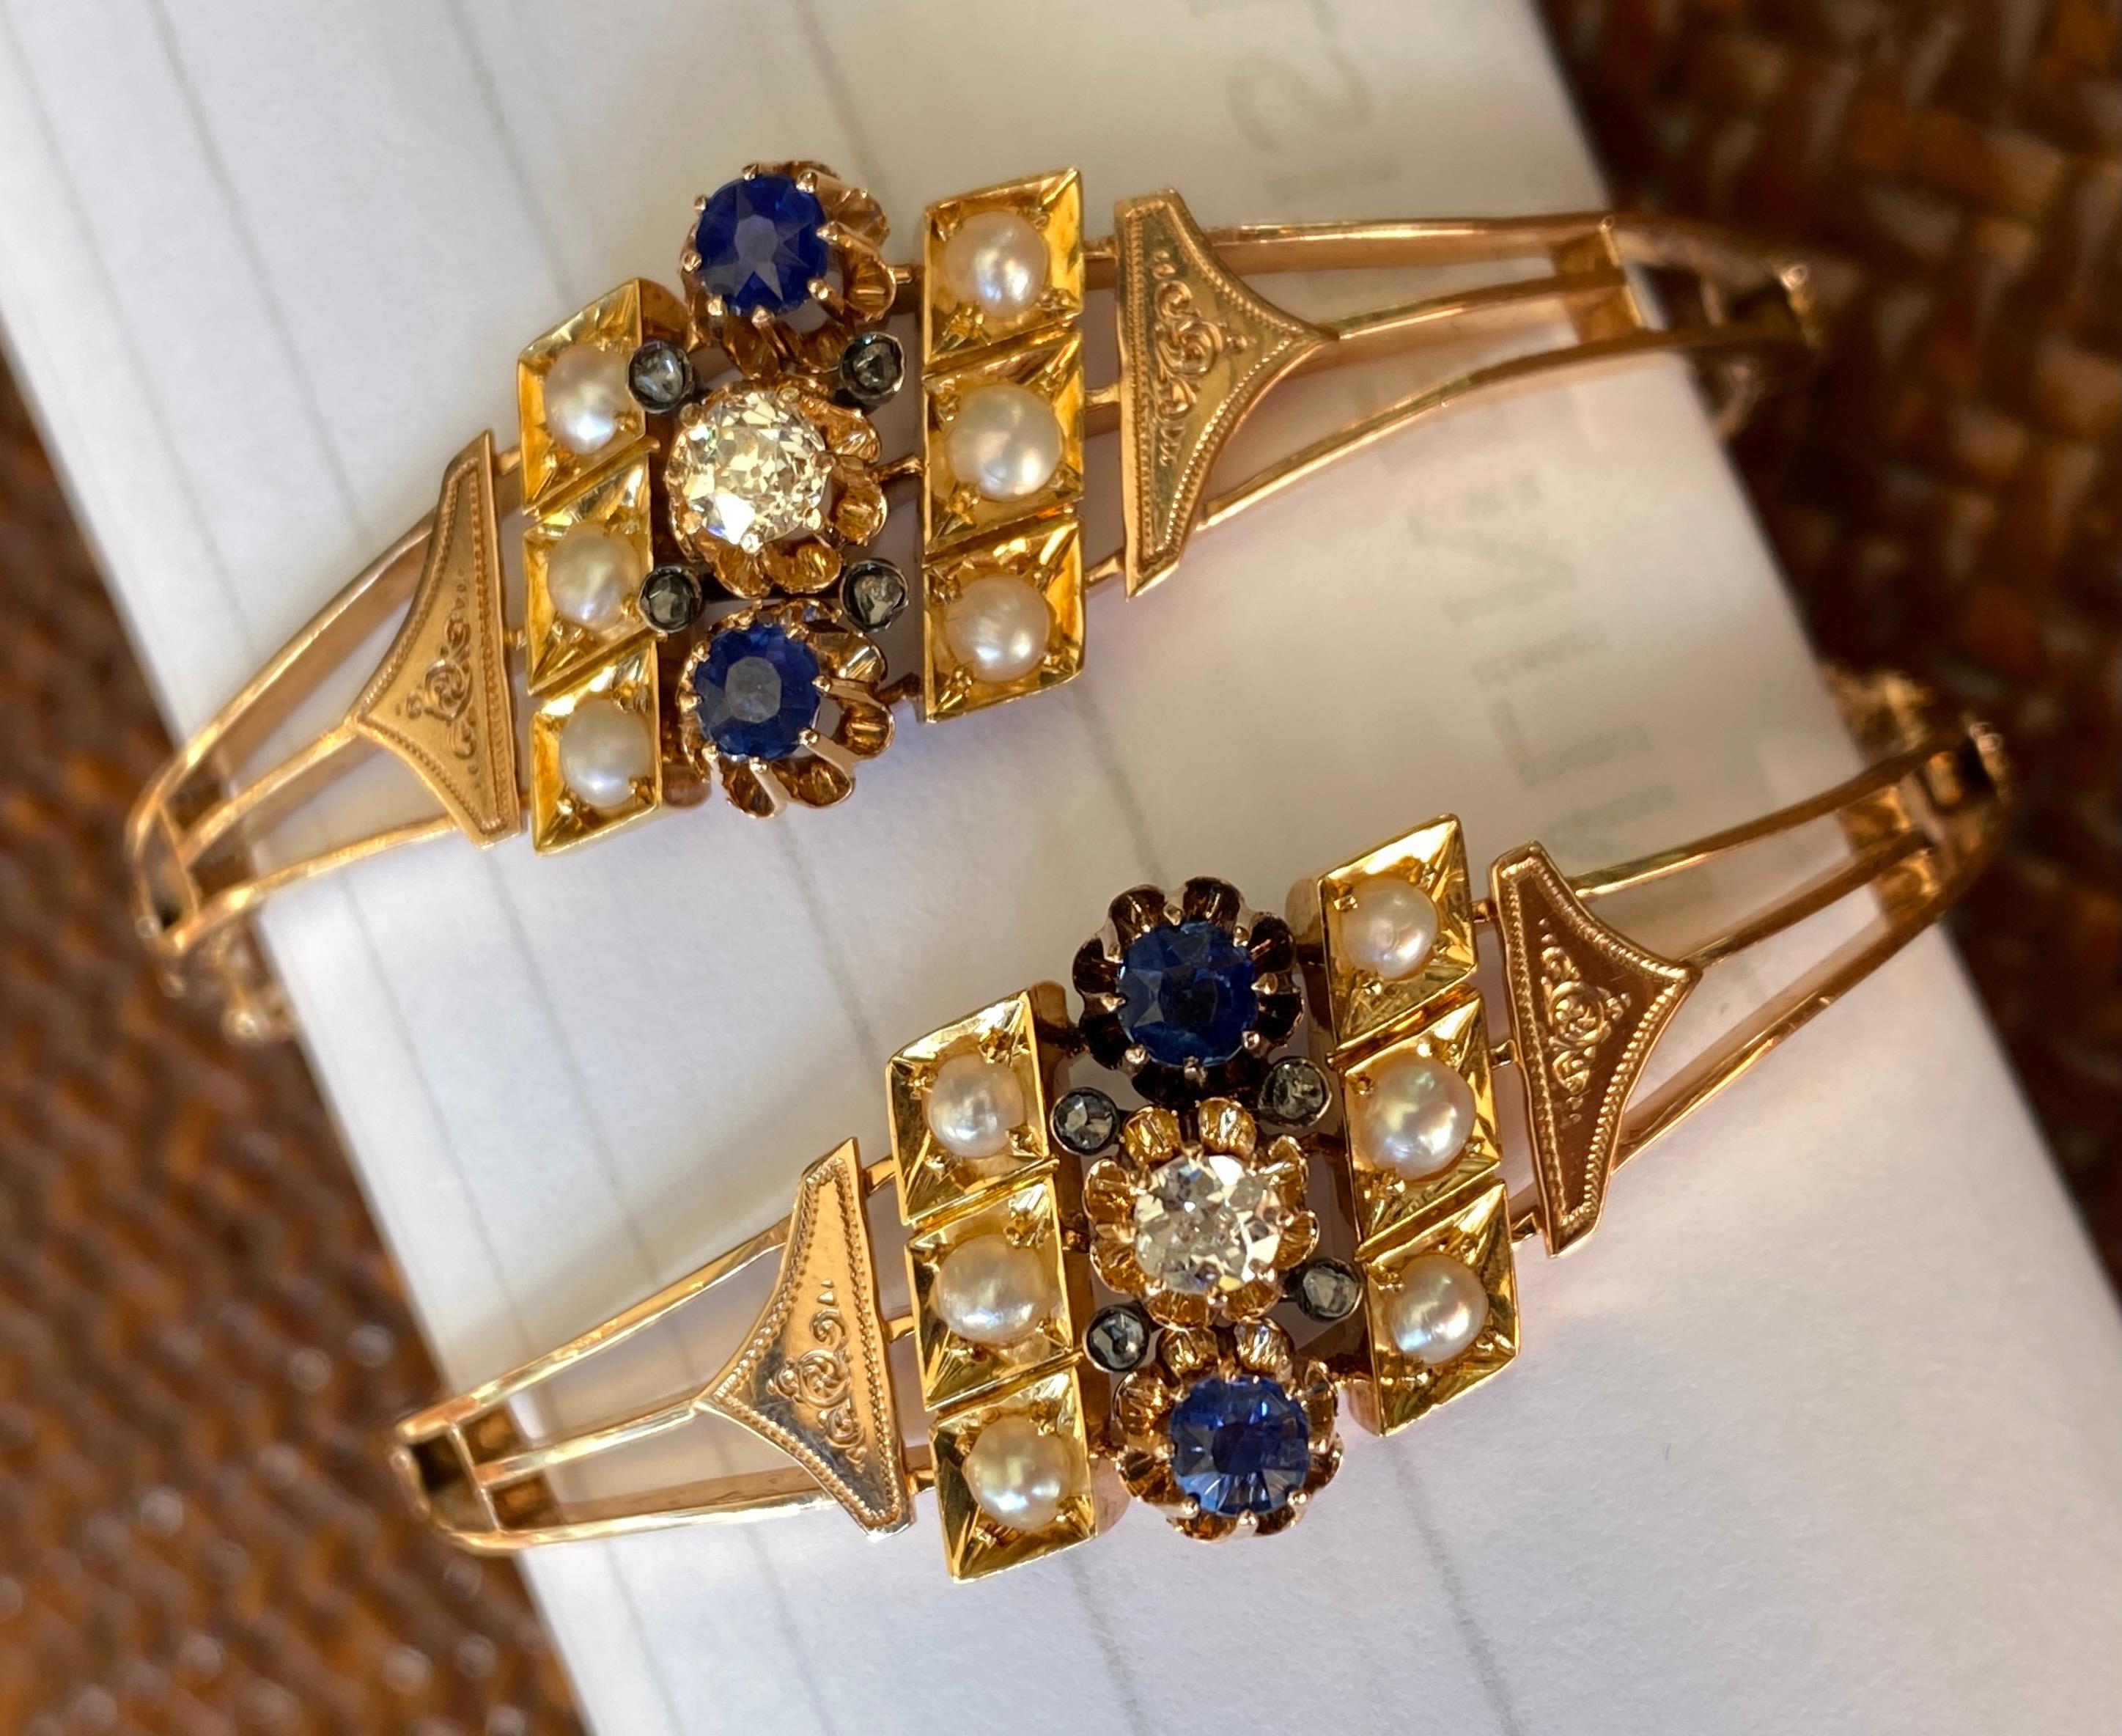 This exceptional pair of 14k gold Victorian wedding bangles date to 1891, late nineteenth century and are a superbly-matched set.  Each one has a center design with a sparkling old european cut diamond flanked by two sapphires in fine buttercup